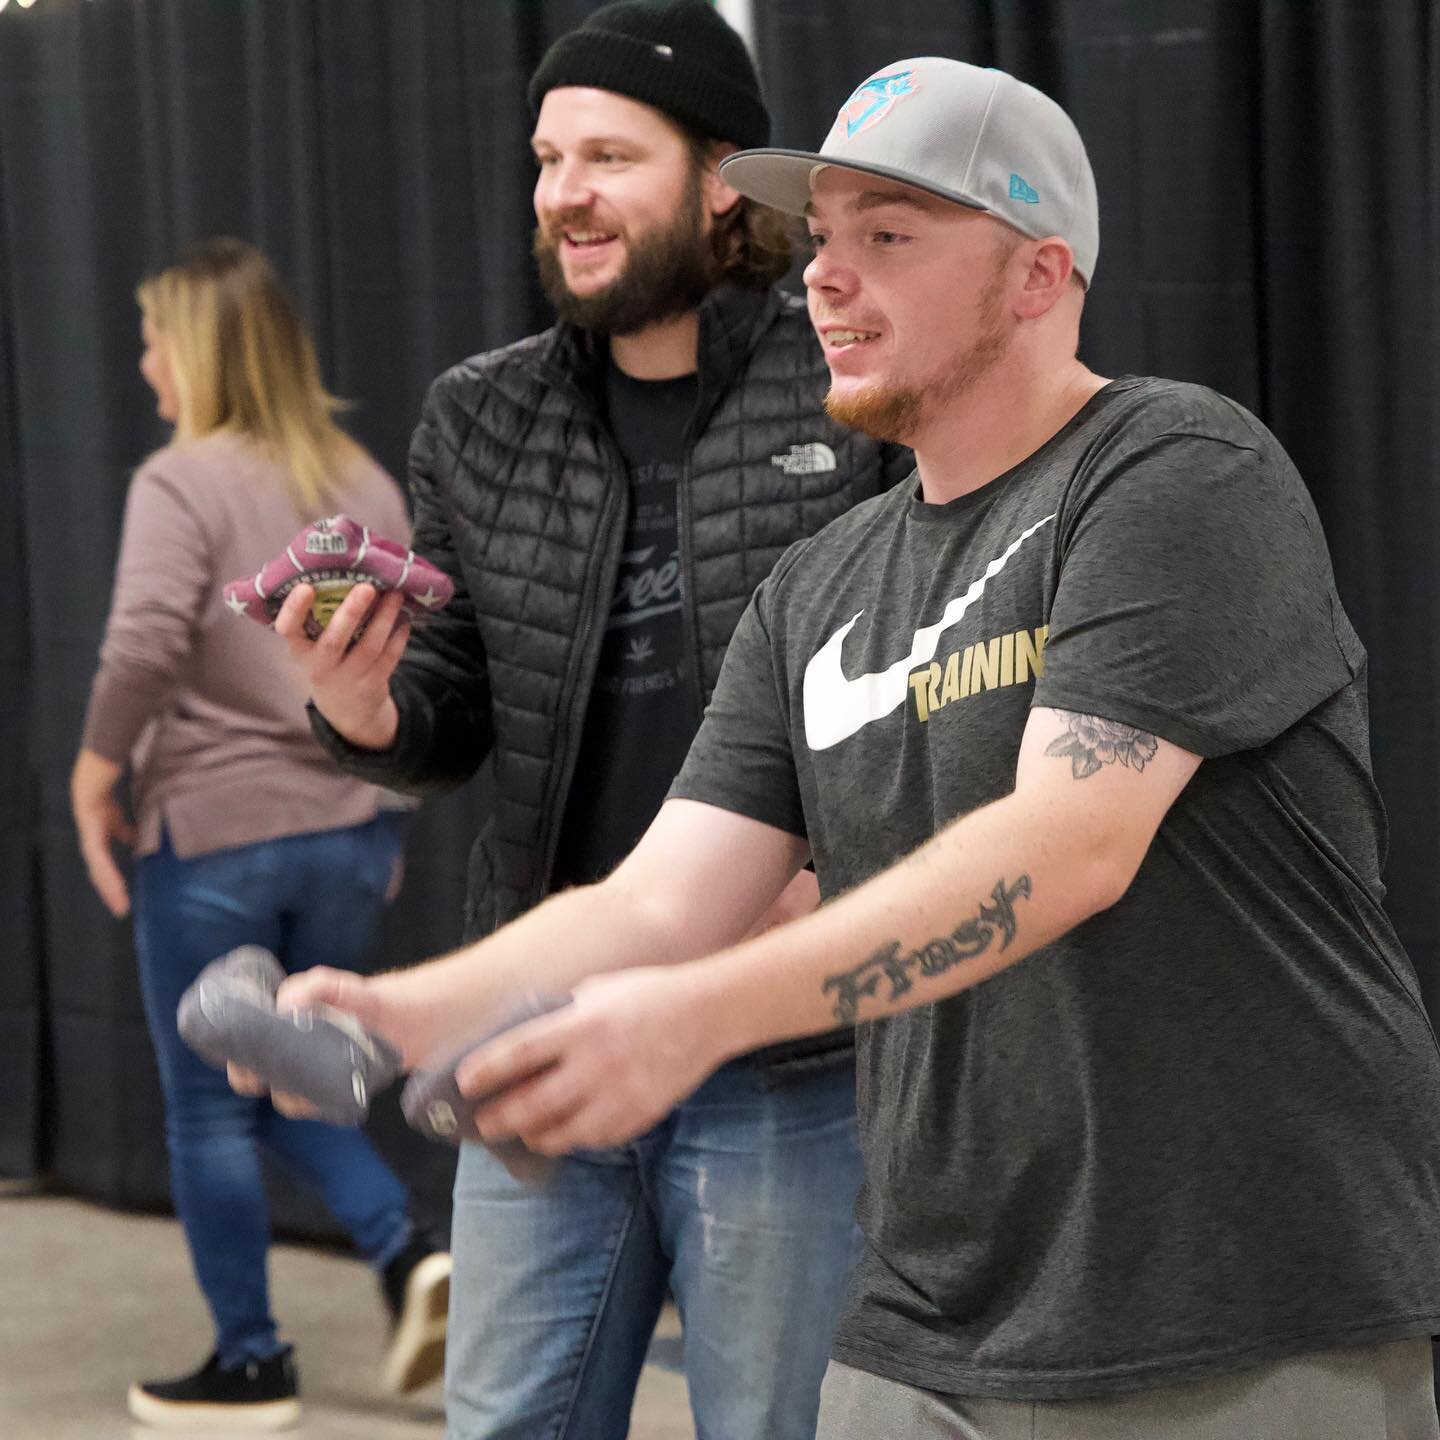 Another great night of cornhole on Monday night. Check out all the great pics, and find out what&rsquo;s ahead for 2023 &hellip; https://www.bccornhole.com/news/fraser-valley-cornhole-is-sold-out